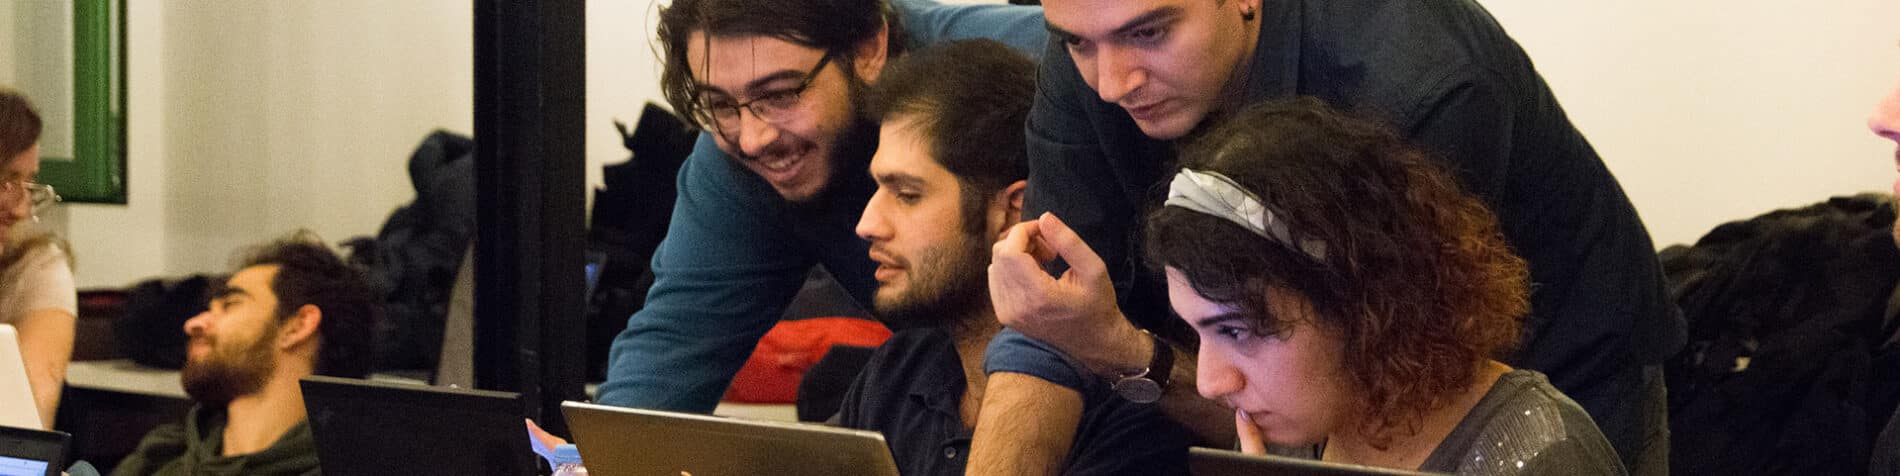 Forced to Flee, Some Refugees Are Rebooting Their Lives as Software Engineers